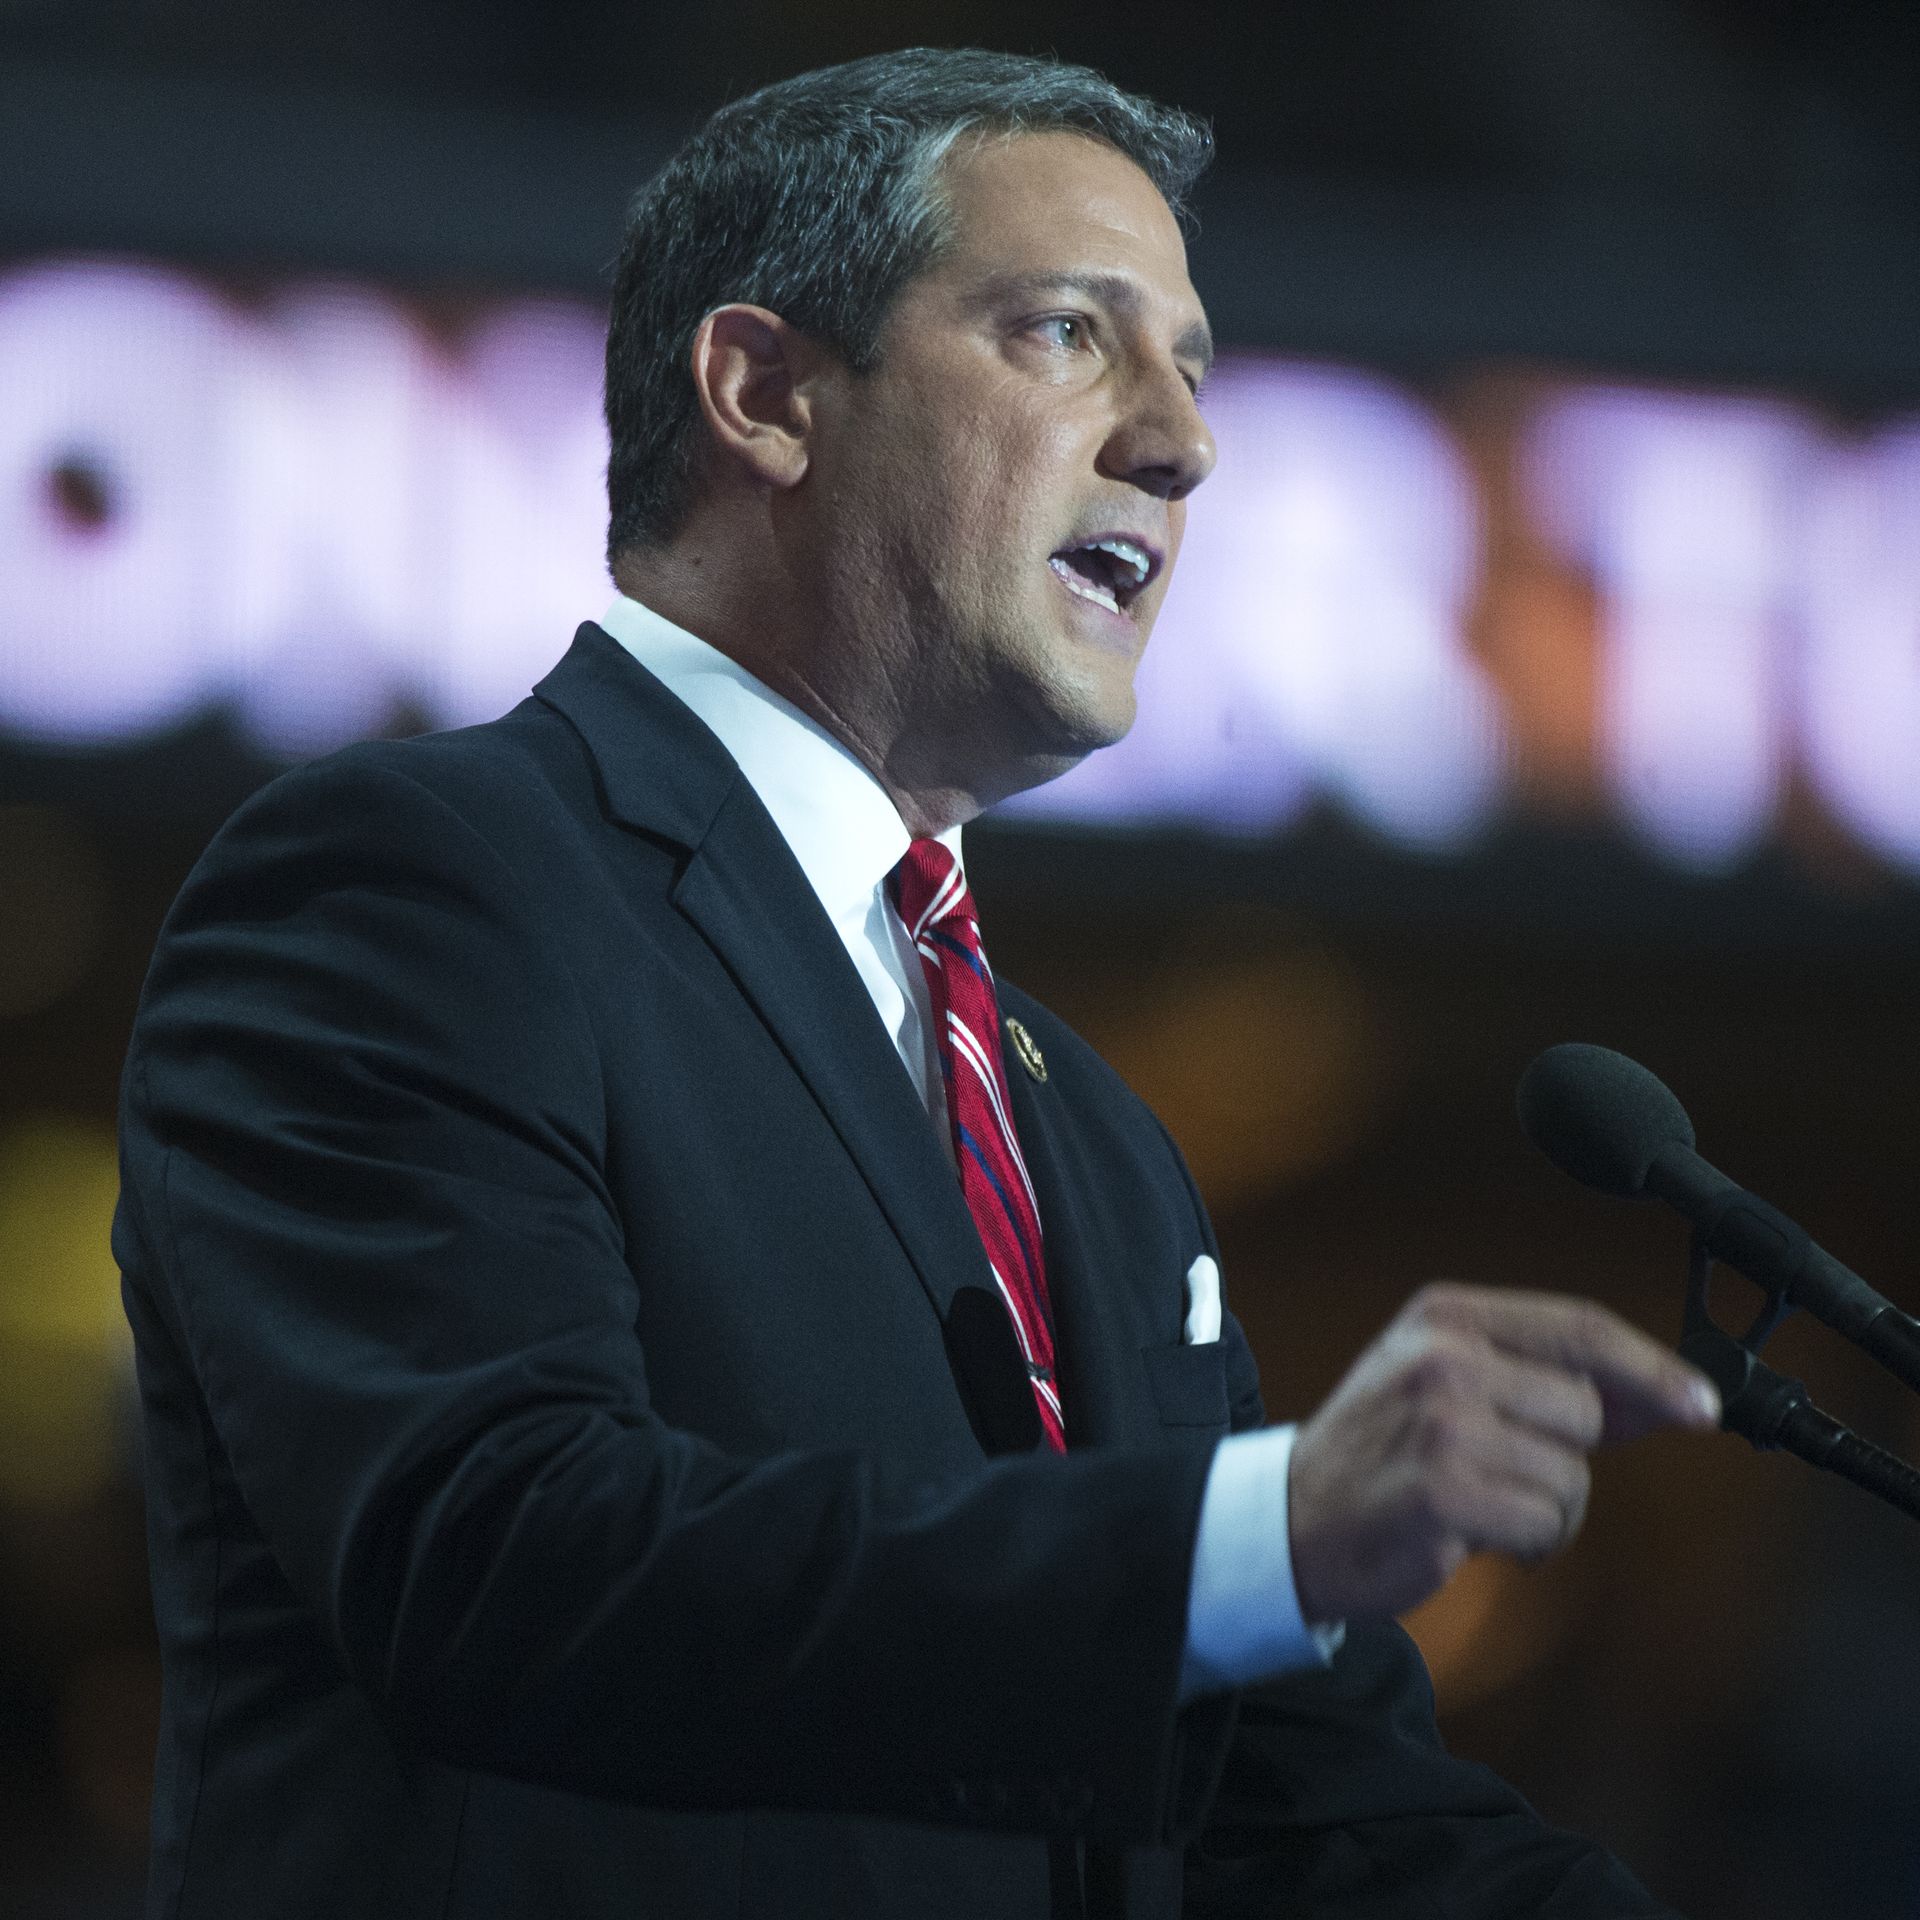 In this image, Tim Ryan speaks into a microphone on stage. 